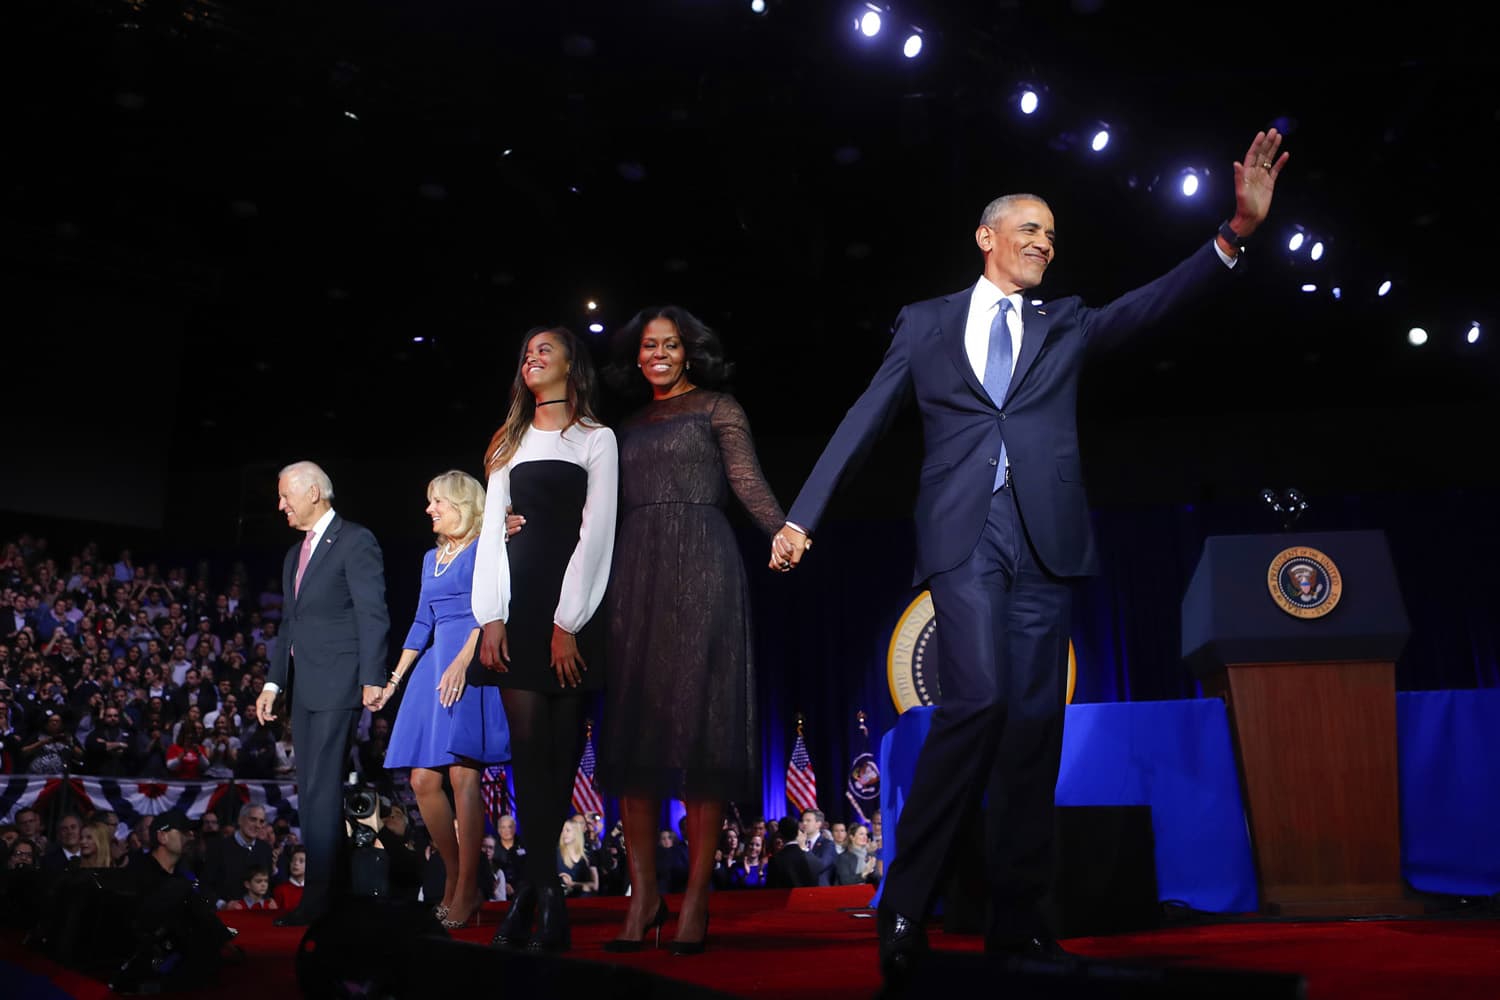 President Barack Obama waves on stage with first lady Michelle Obama, daughter Malia, Vice President Joe Biden and his wife Jill Biden after his farewell address at McCormick Place in Chicago. (Pablo Martinez Monsivais/AP)